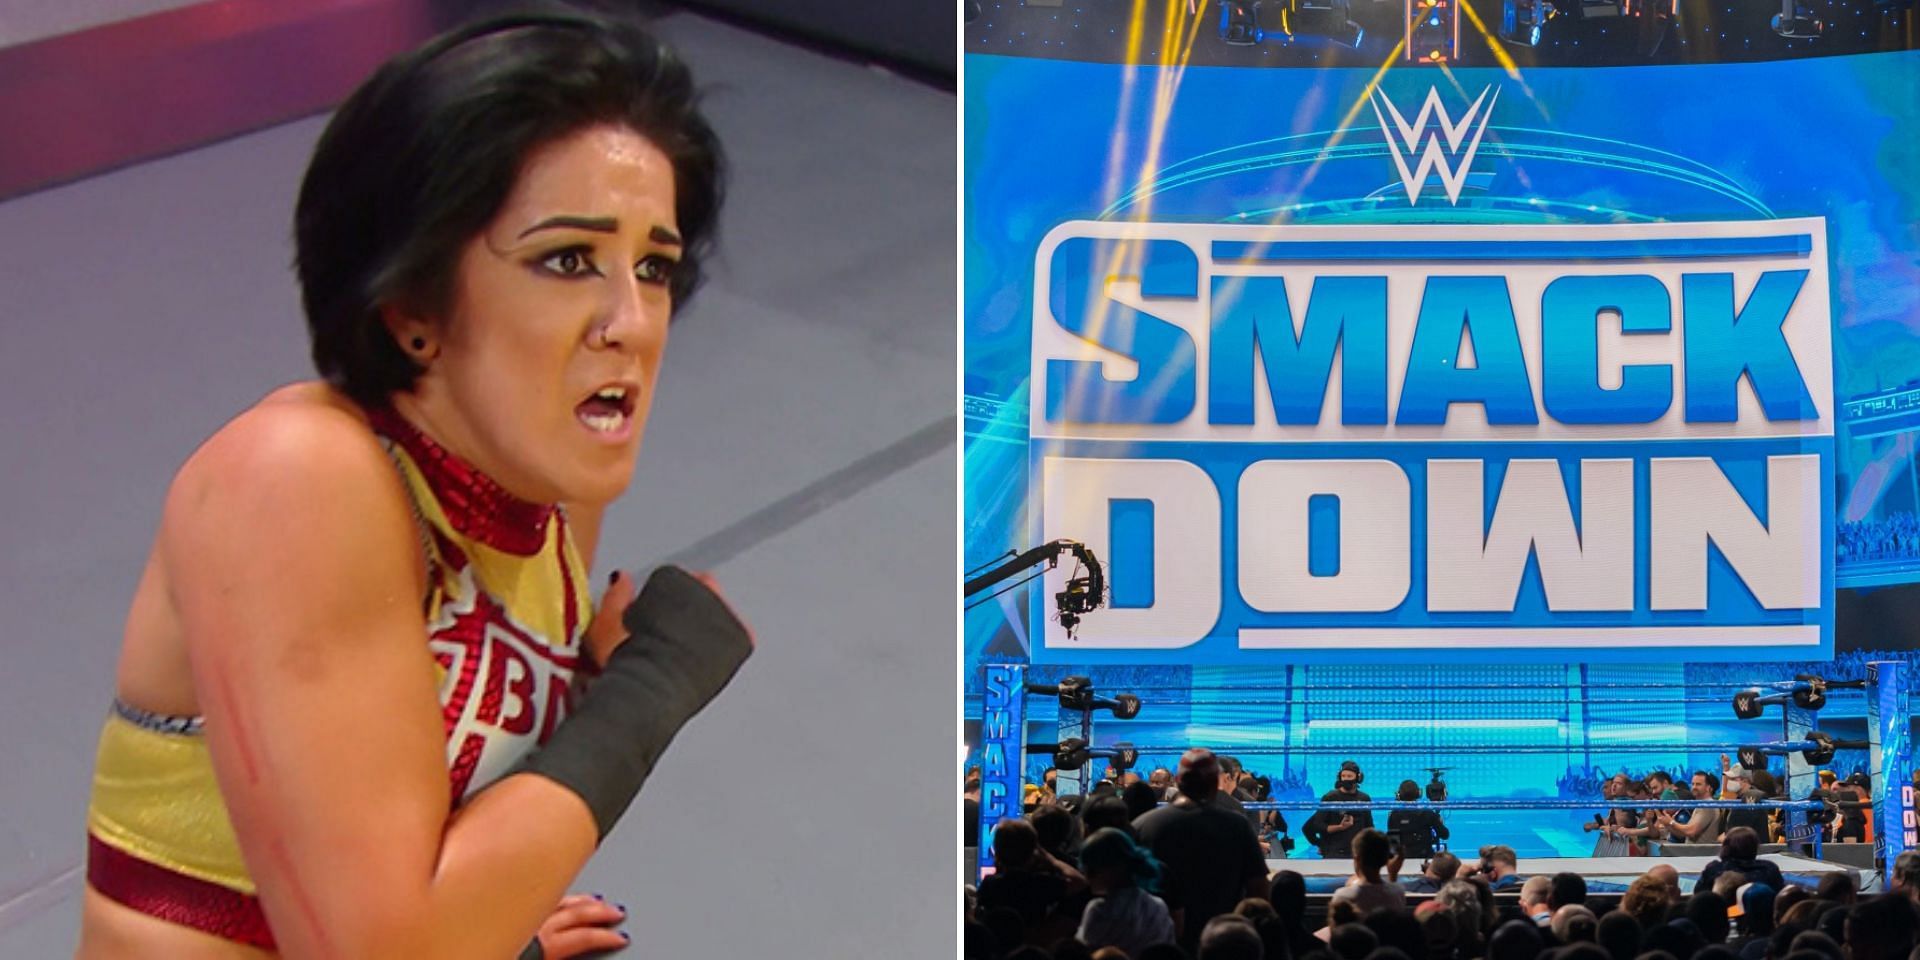 Bayley was confronted by a returning star on SmackDown